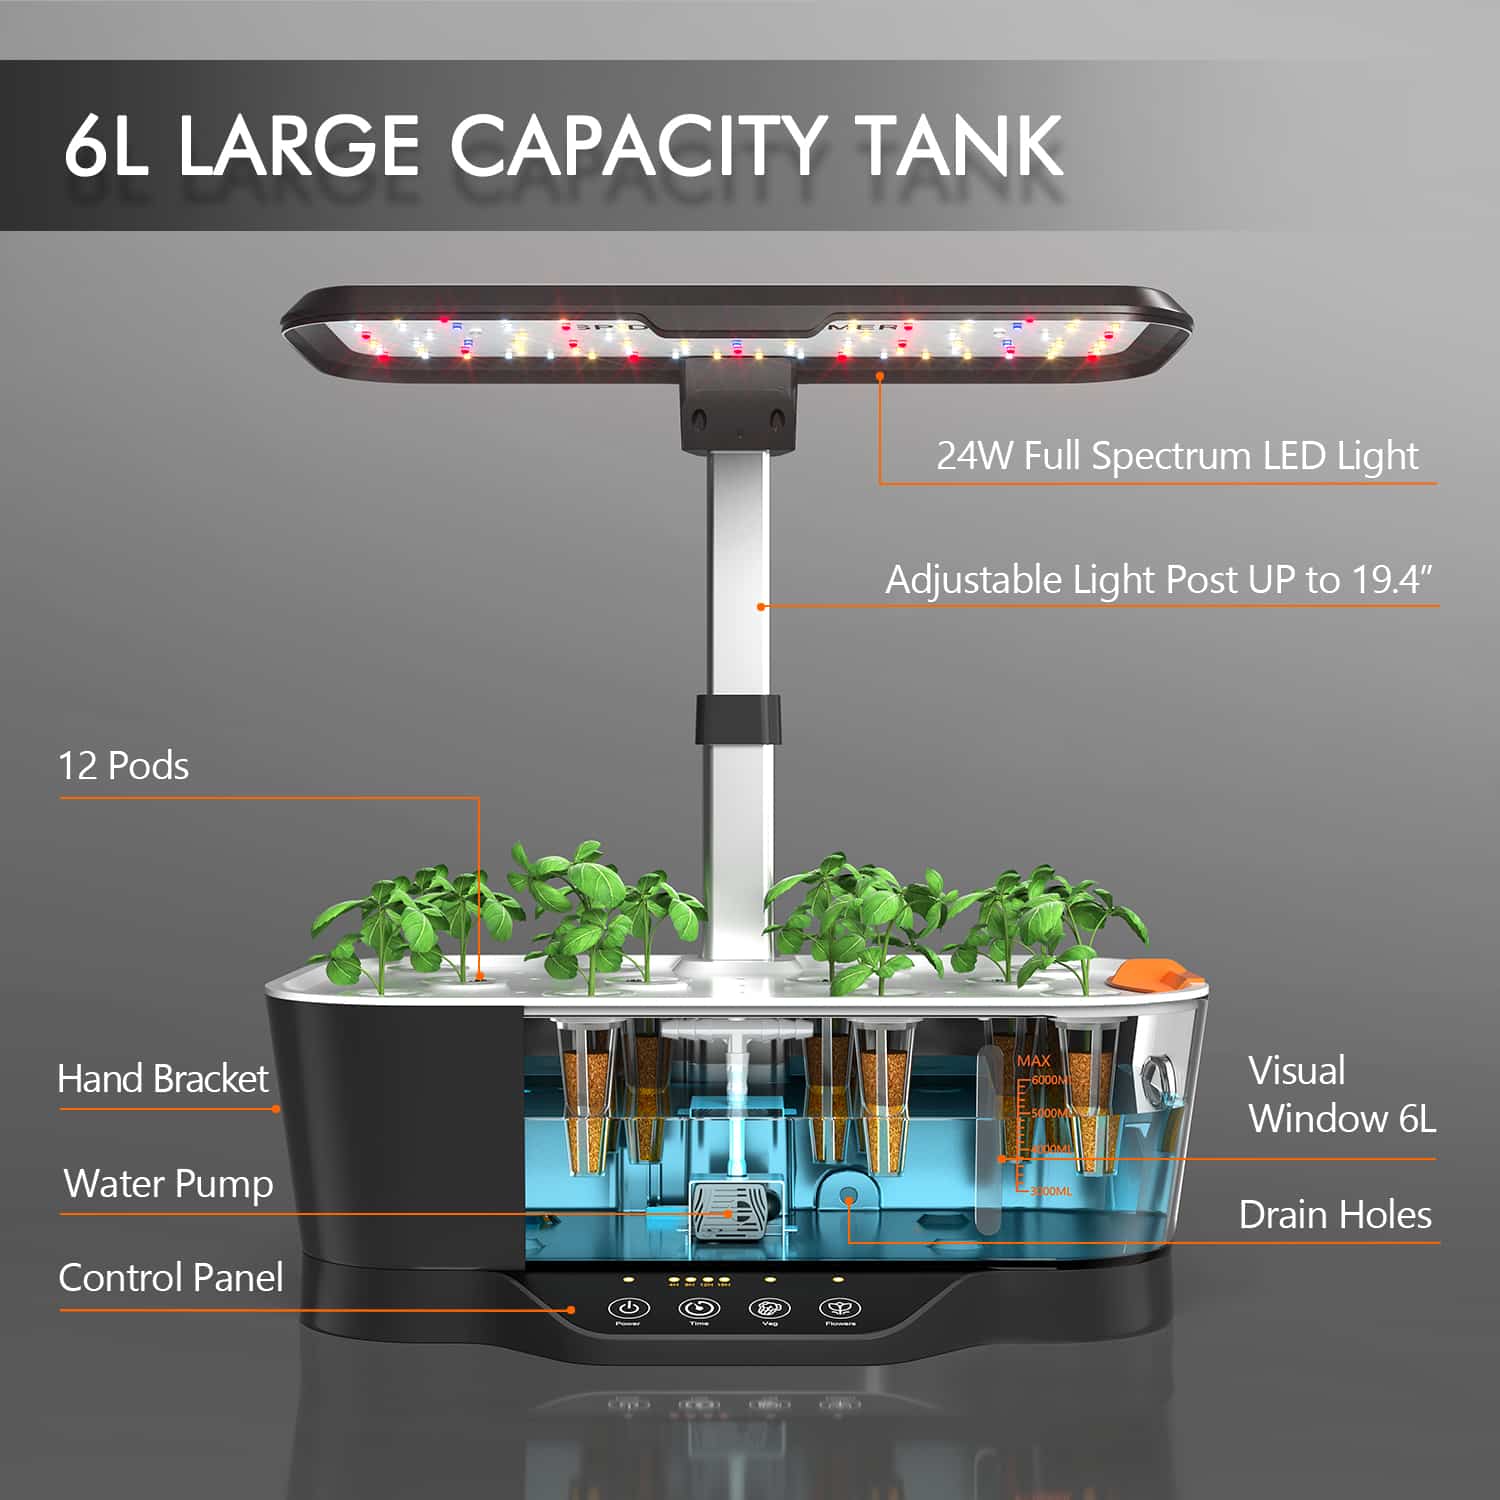 Product Secondary Image:Spider Farmer® Smart G12 Indoor Hydroponic Grow System